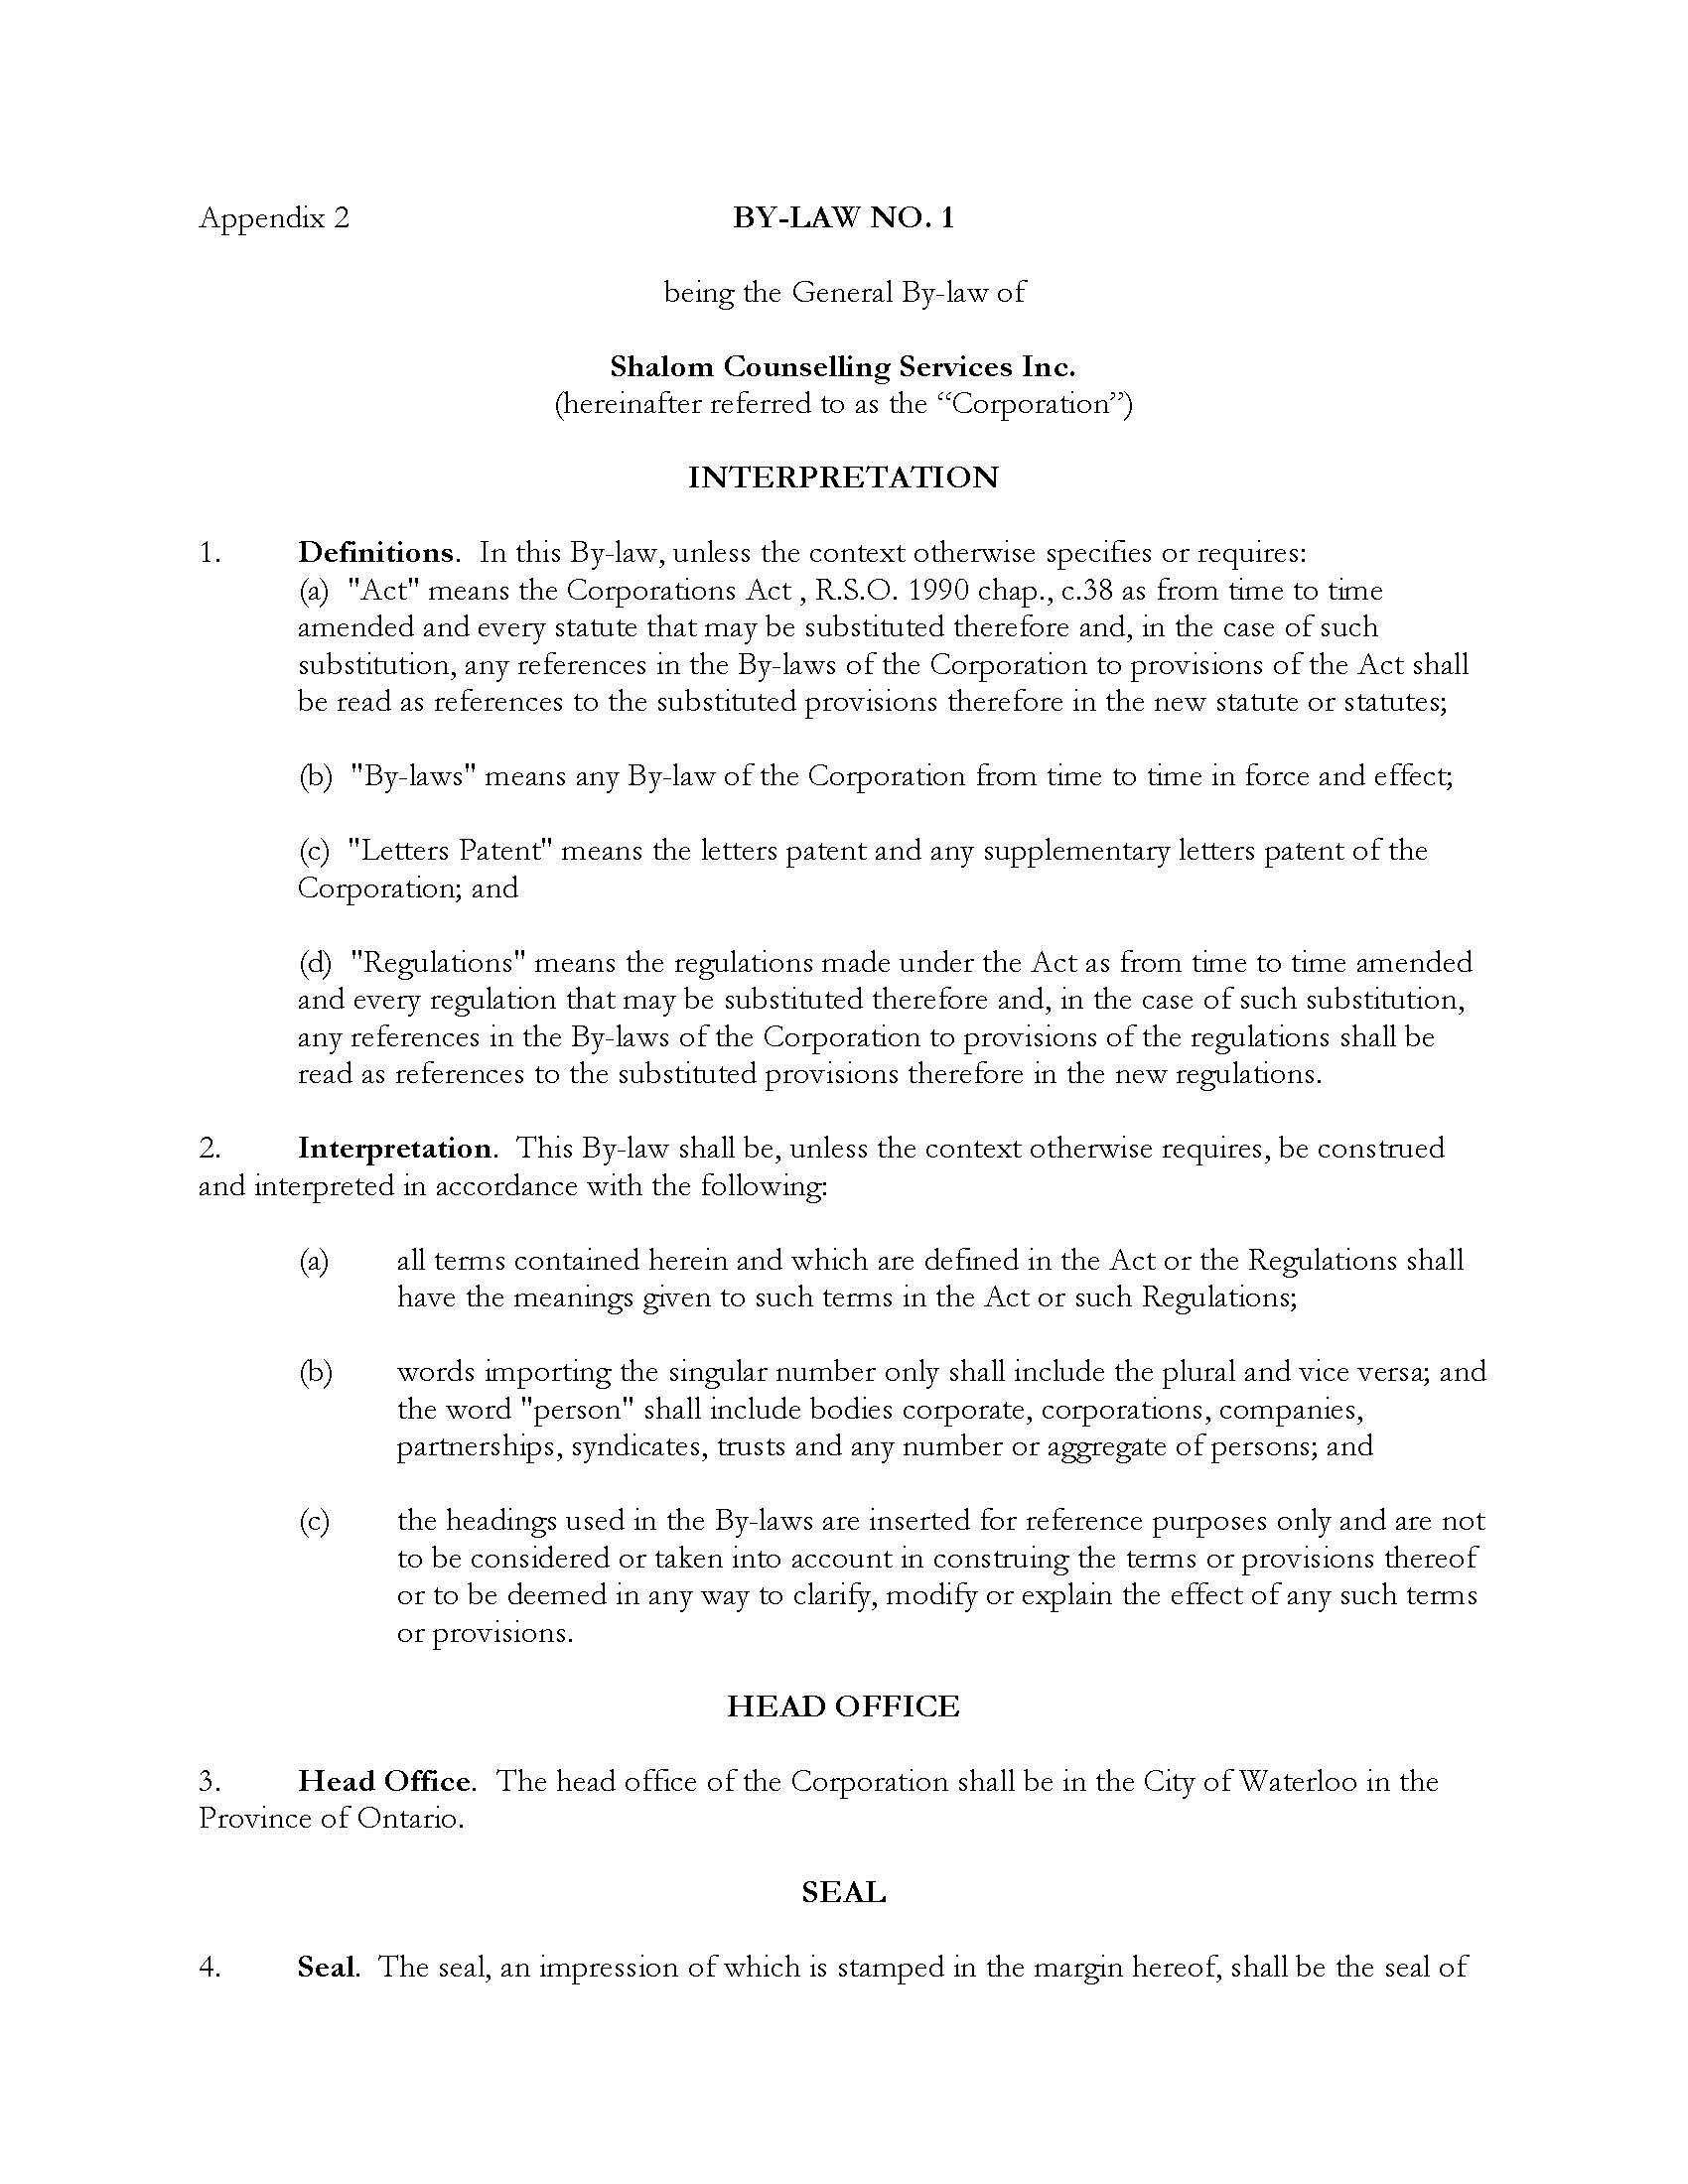 Previous Shalom Bylaws pg 1